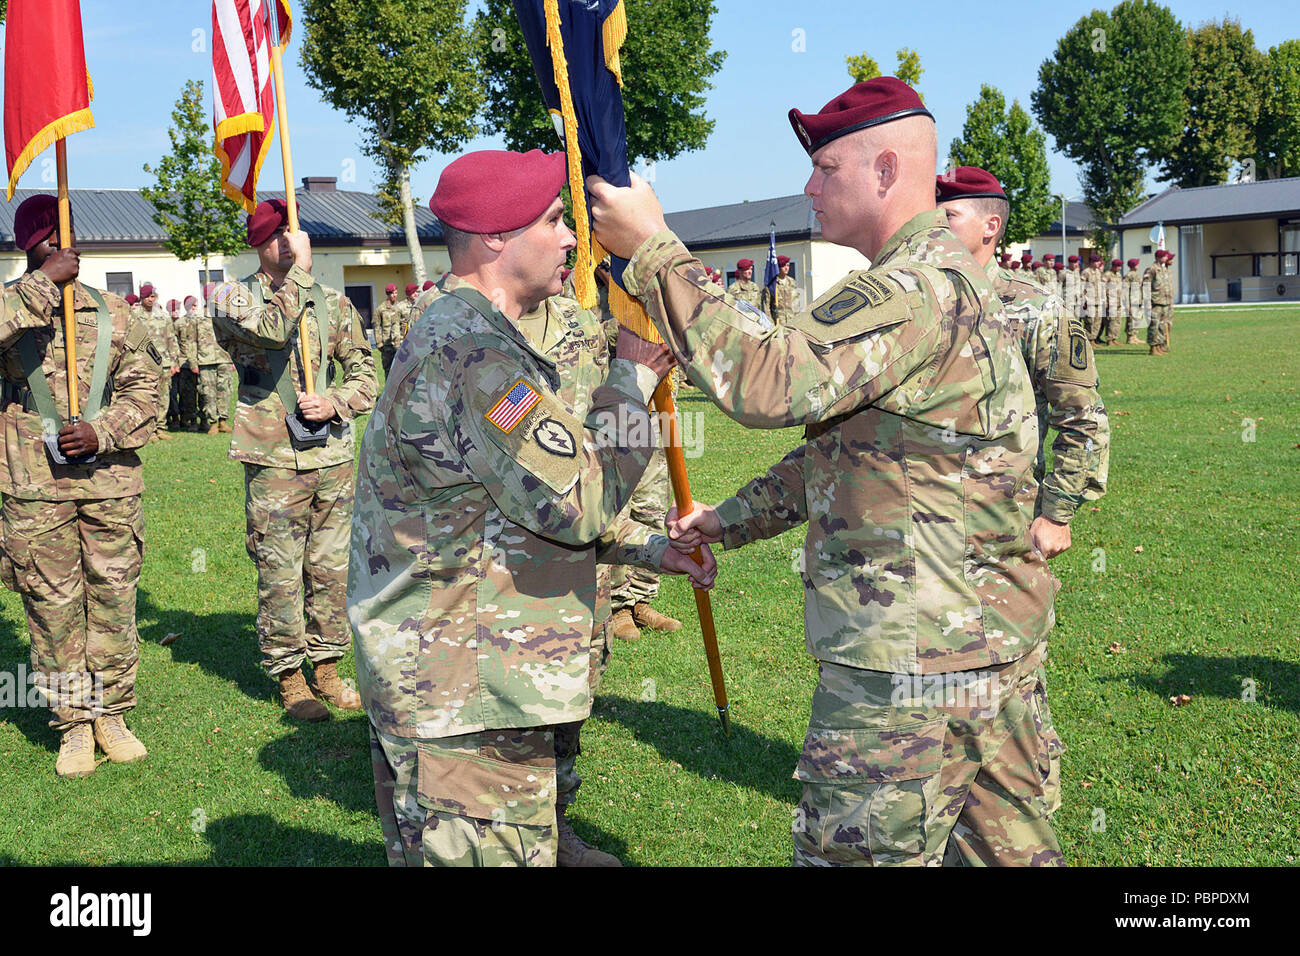 U.S. Army Command Sgt. Maj. Michael L. Palm, incoming Command Sgt. Maj. for the 1st Battalion, 503rd Infantry Regiment, 173rd Airborne Brigade (left), receives the colors to Lt. Col. Robert M. Shaw, commander of 1st Battalion, 503rd Infantry Regiment, 173rd Airborne Brigade, during the change of responsibility ceremony at Caserma Ederle in Vicenza, Italy, July 19, 2018. The 173rd Airborne Brigade is the U.S. Army Contingency Response Force in Europe, capable of projecting ready forces anywhere in the U.S. European, Africa or Central Commands' areas of responsibility. (U.S. Army photo by Davide Stock Photo